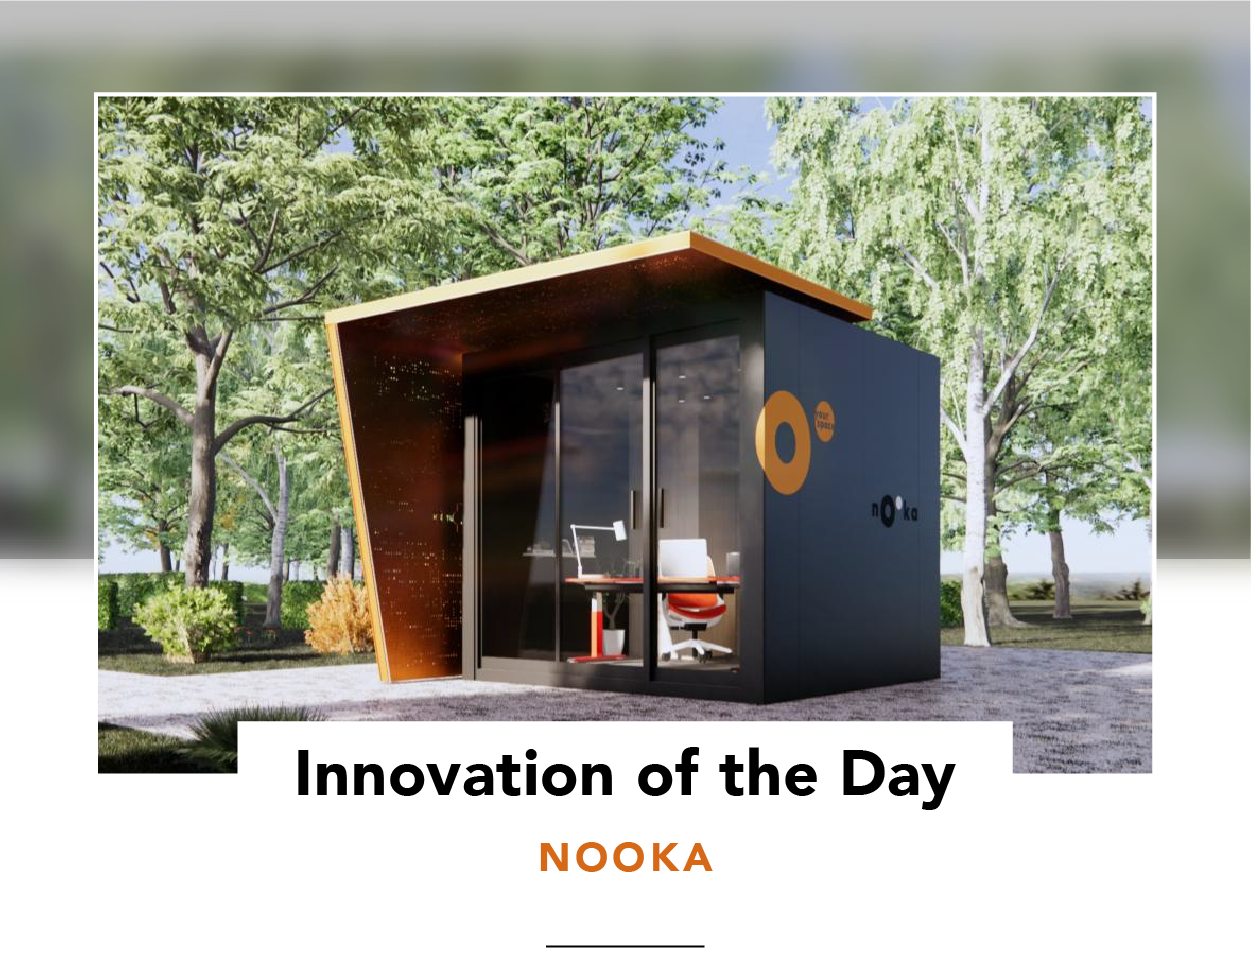 A stand-alone Nooka office surrounded by trees